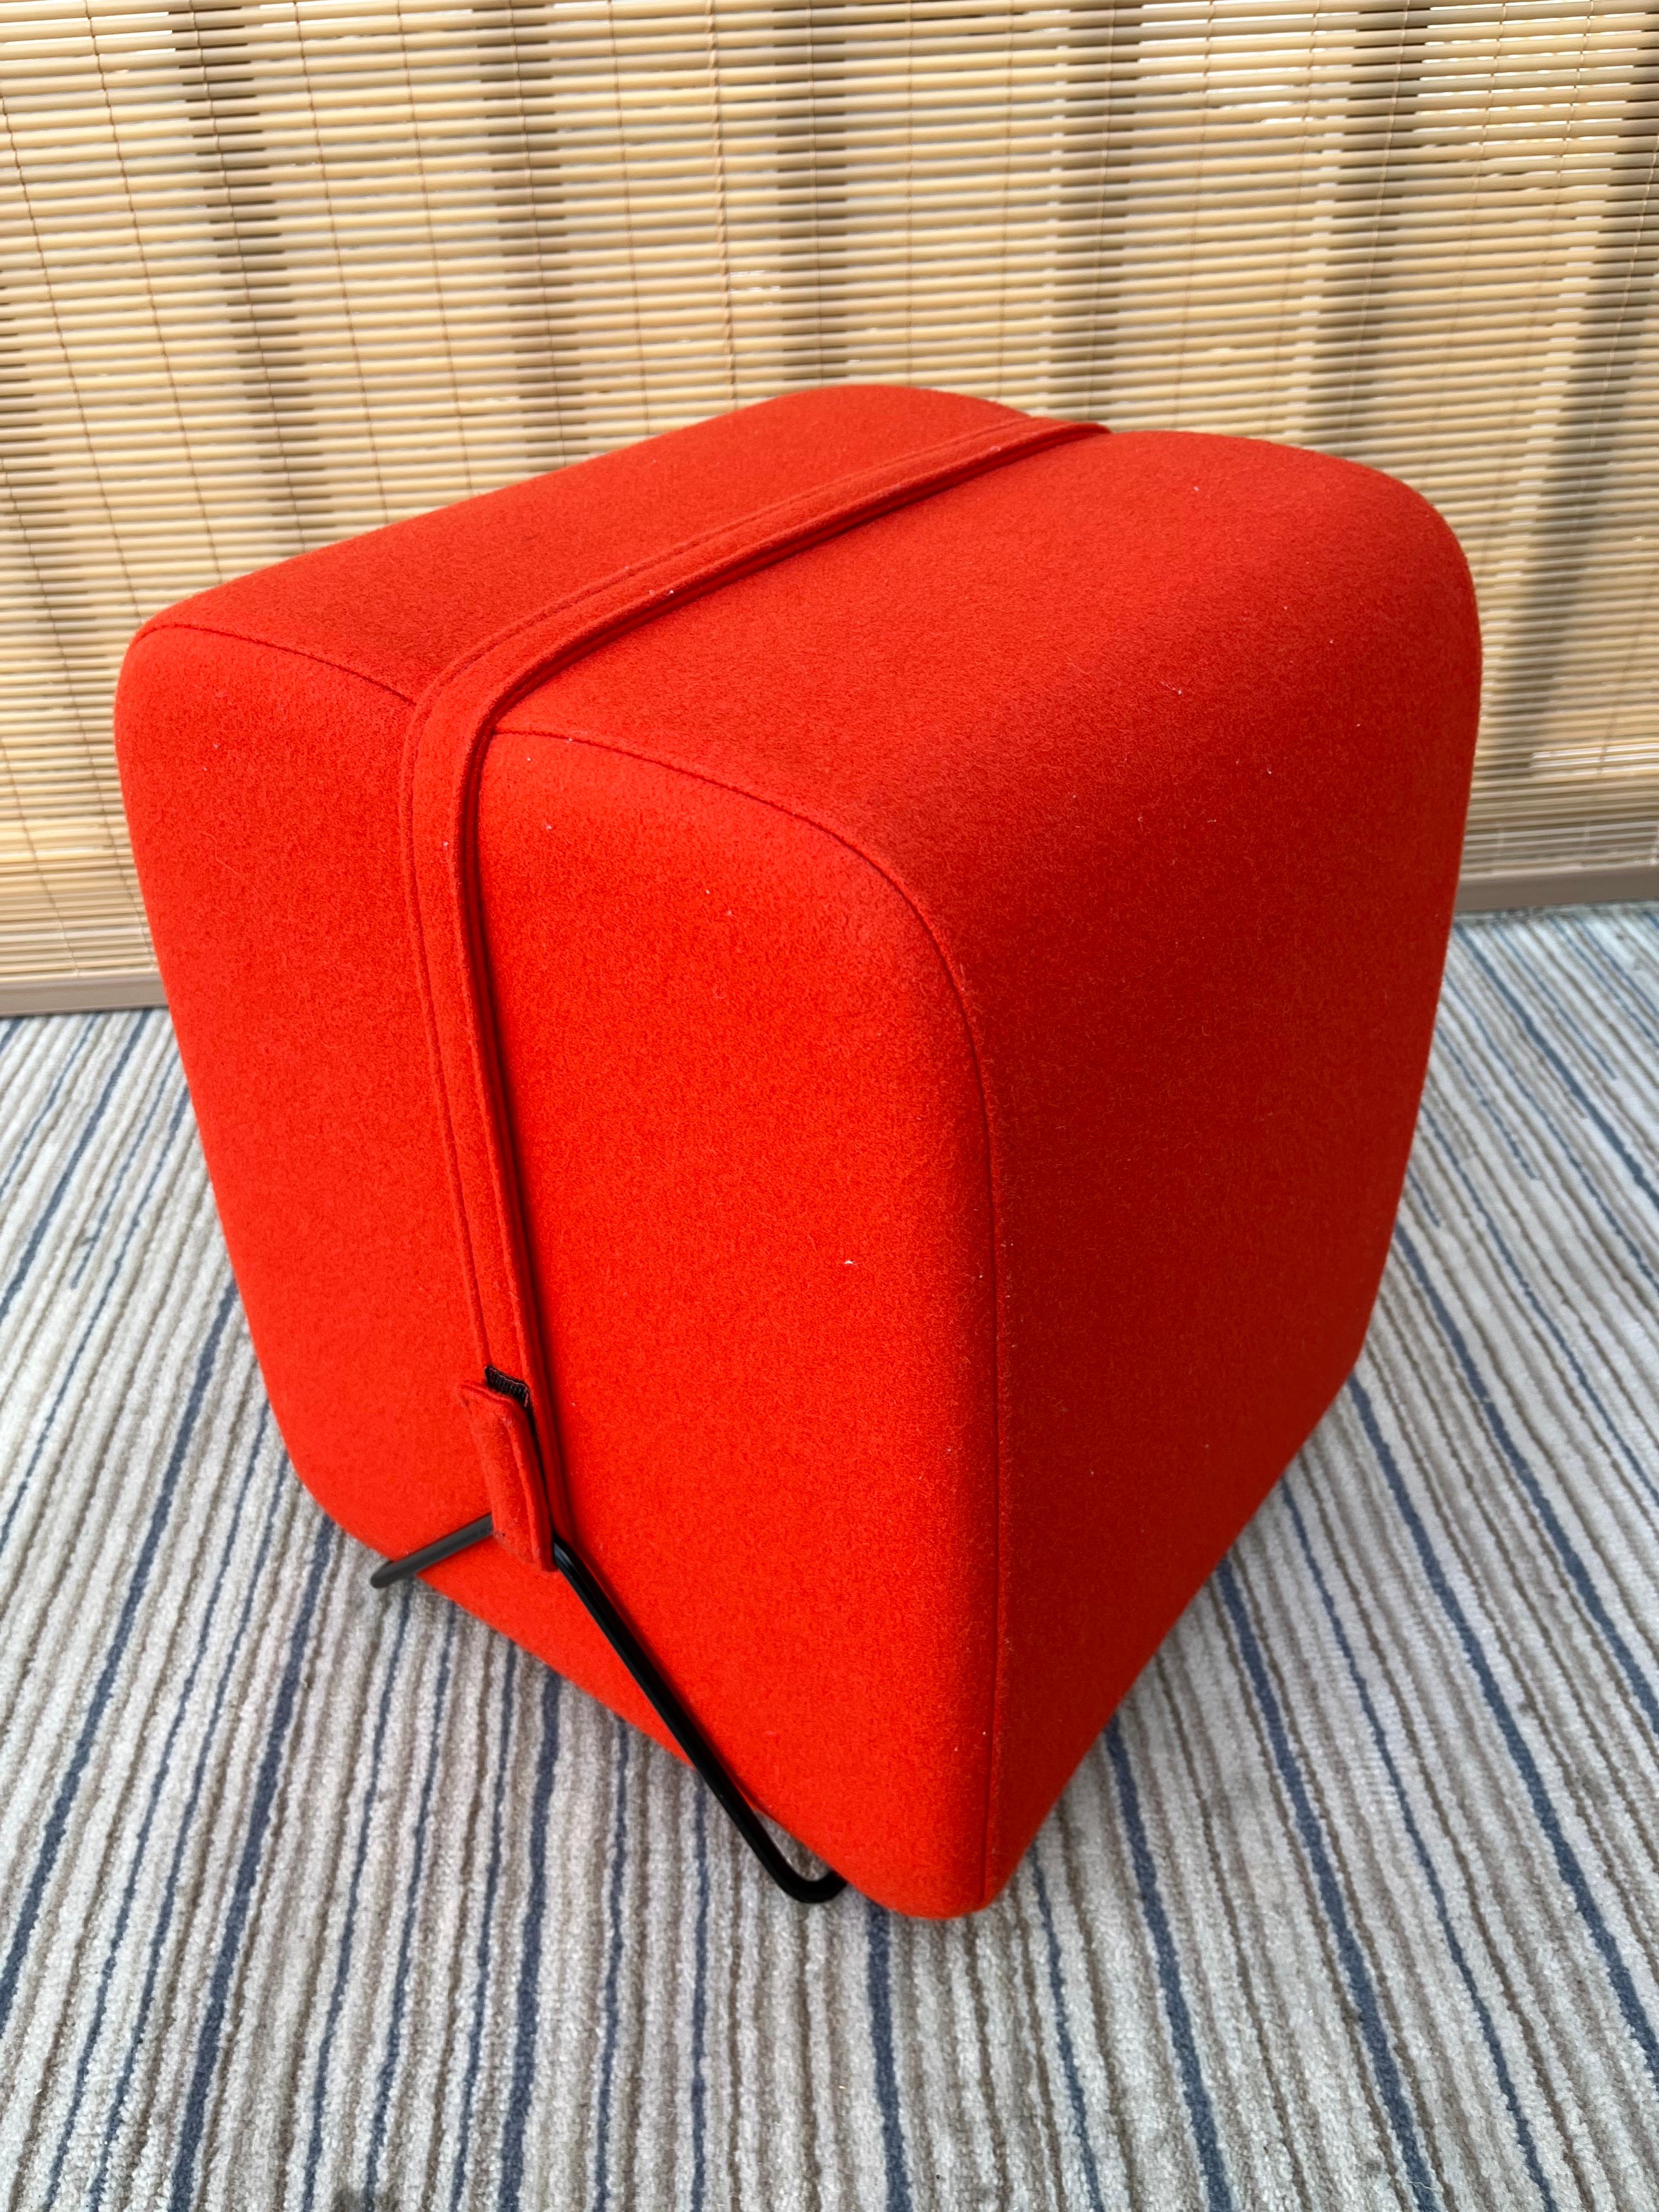 Contemporary Mobidec Footstool by Pierre Charpin for Ligne Roset 8